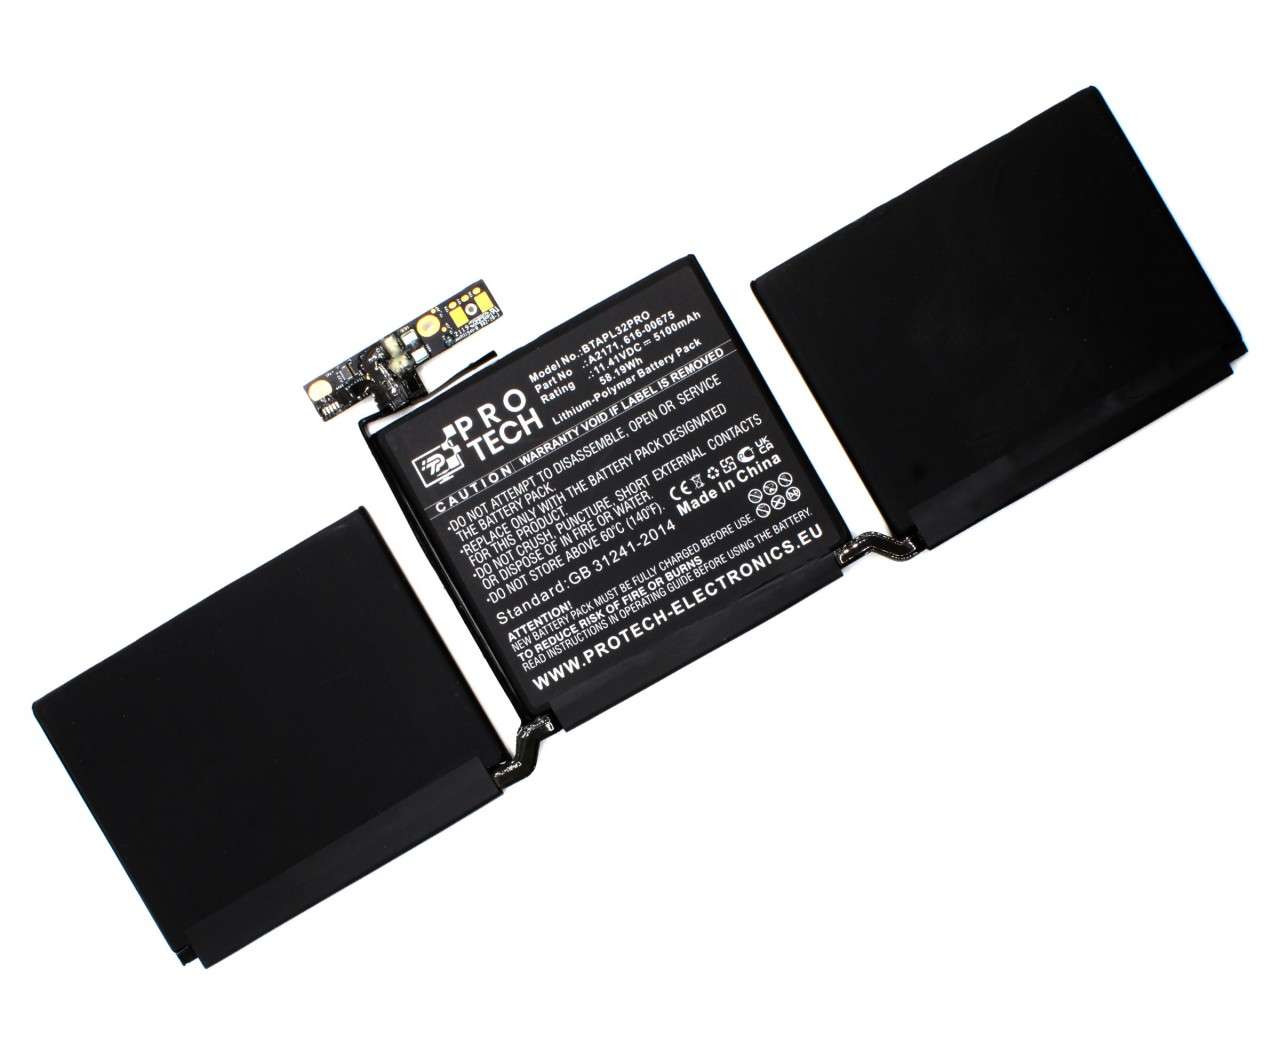 Baterie Apple Macbook Pro 13 Touch Bar A2159 2019 Protech High Quality Replacement 2019 imagine noua tecomm.ro